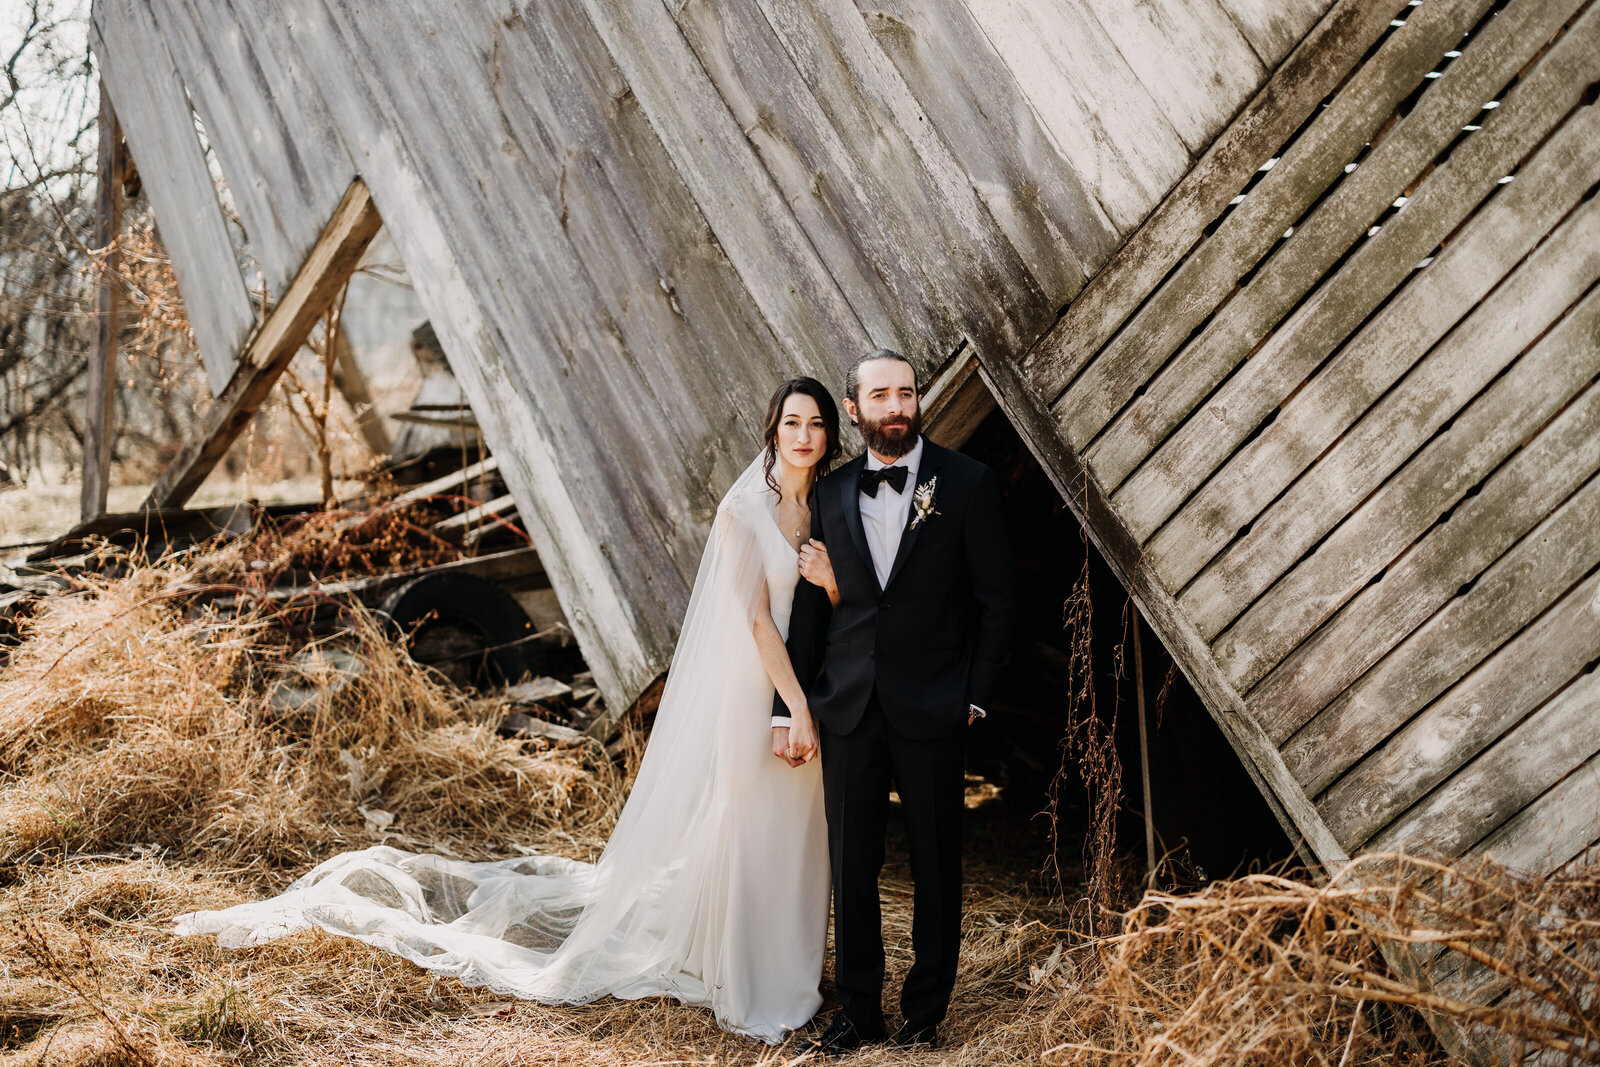 bride veil and groom tux at old barn